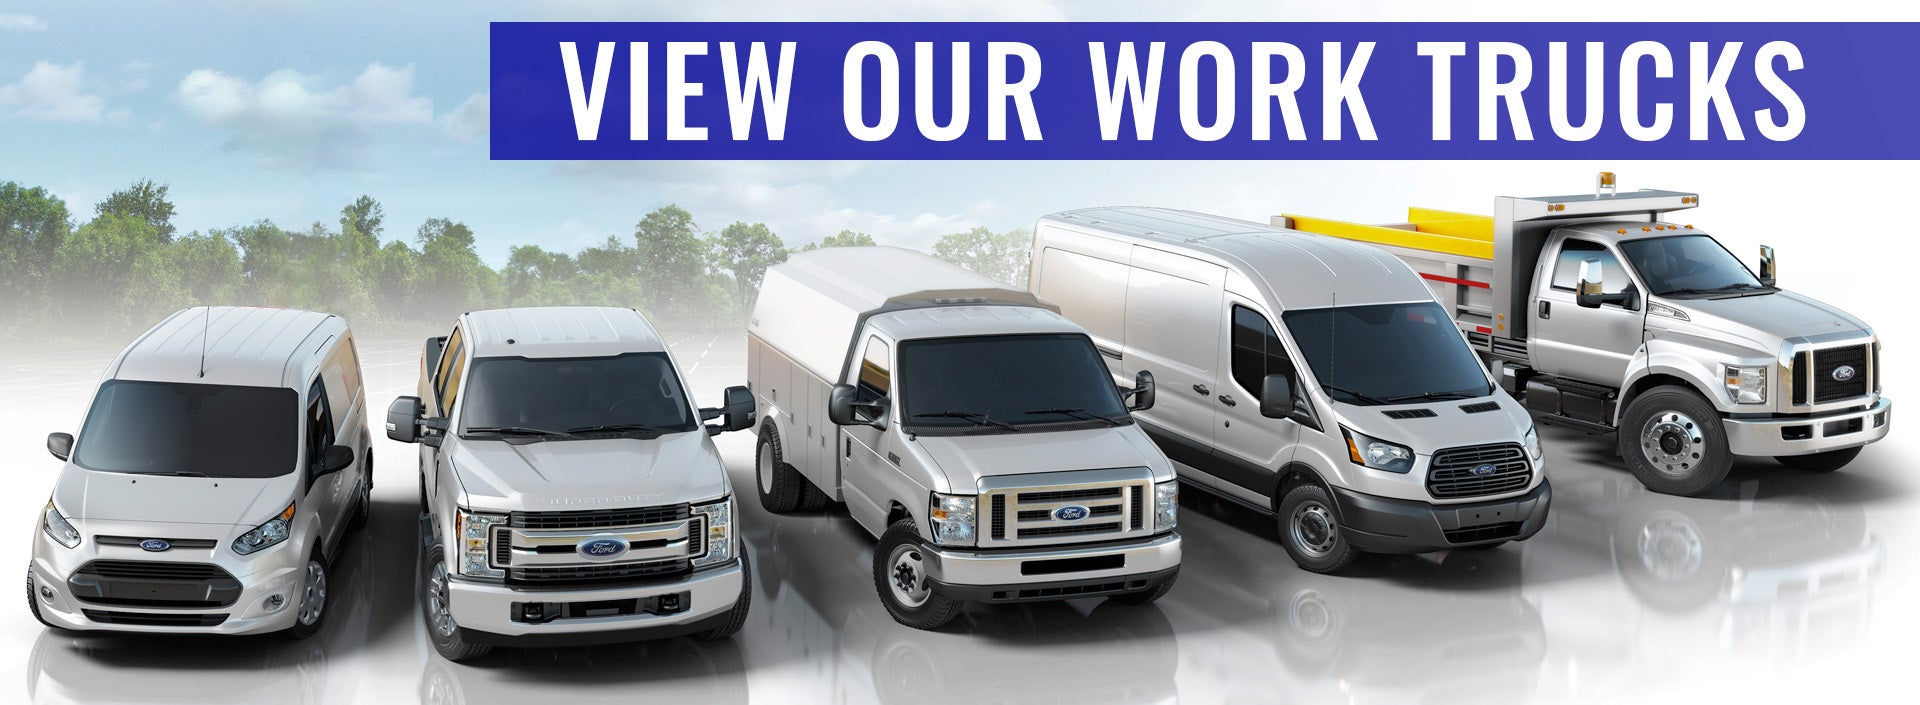 View Our Work Trucks banner